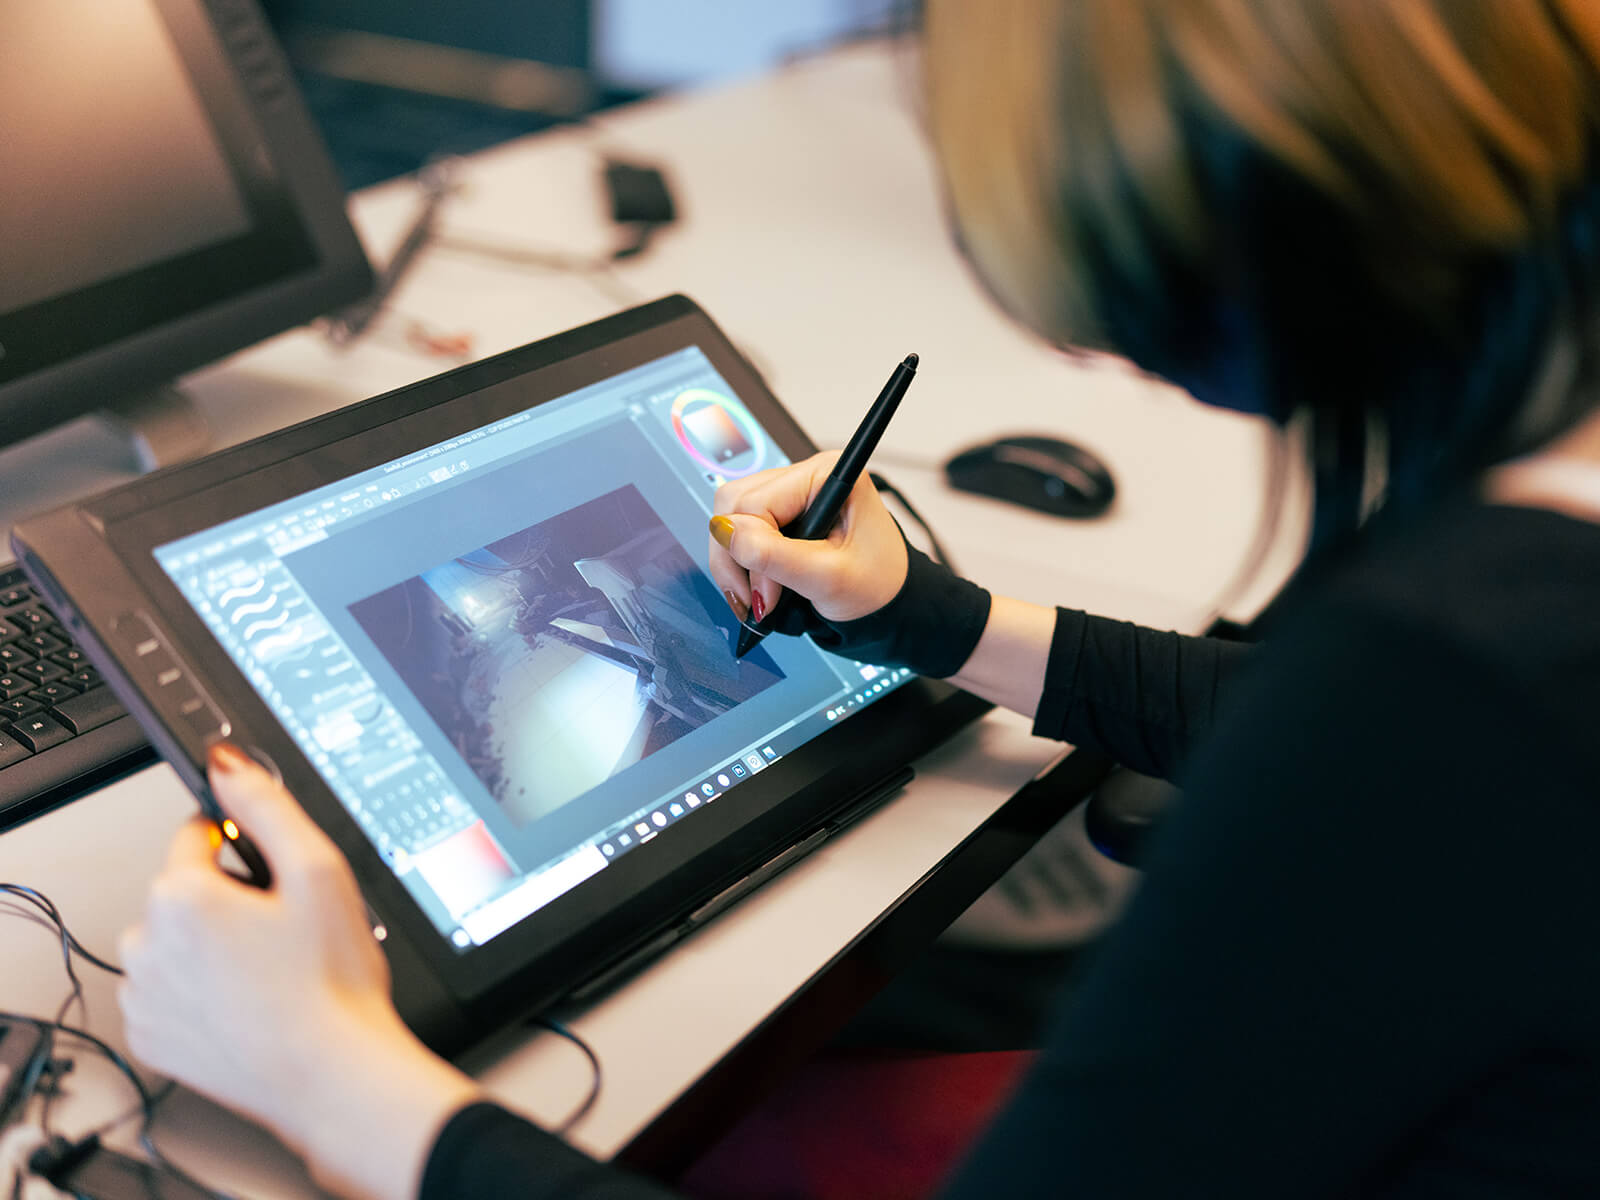 A DigiPen student works on her film team project on her drawing tablet.